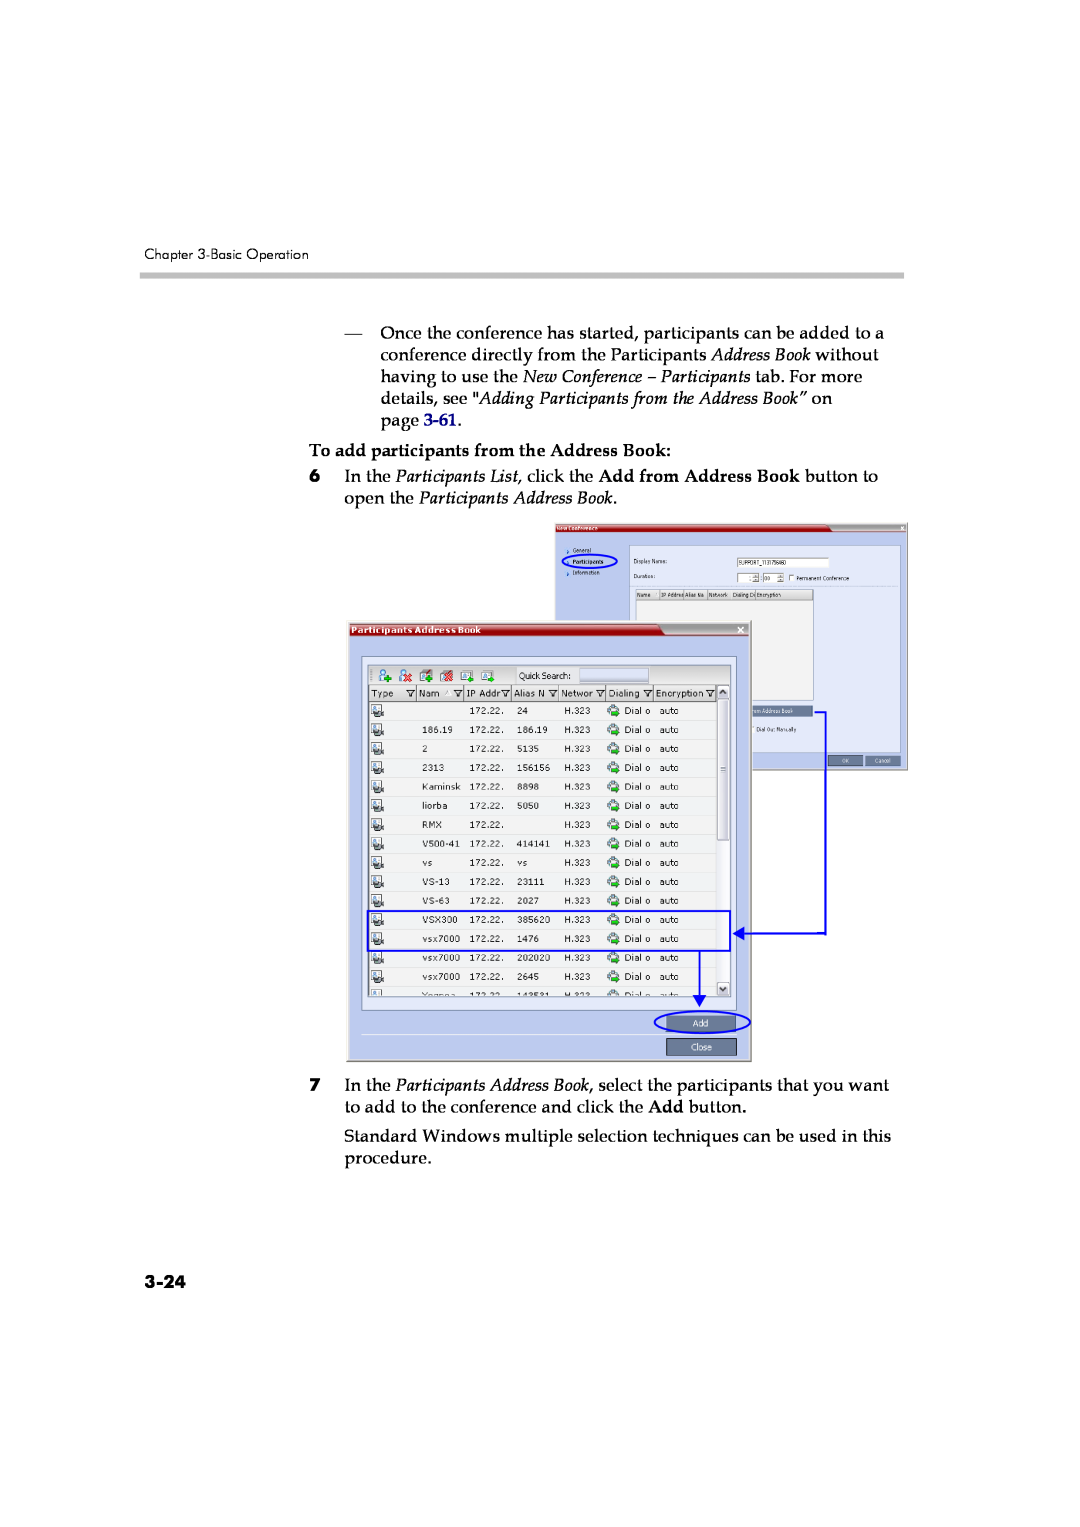 Polycom DOC2560B manual To add participants from the Address Book, 3-24 